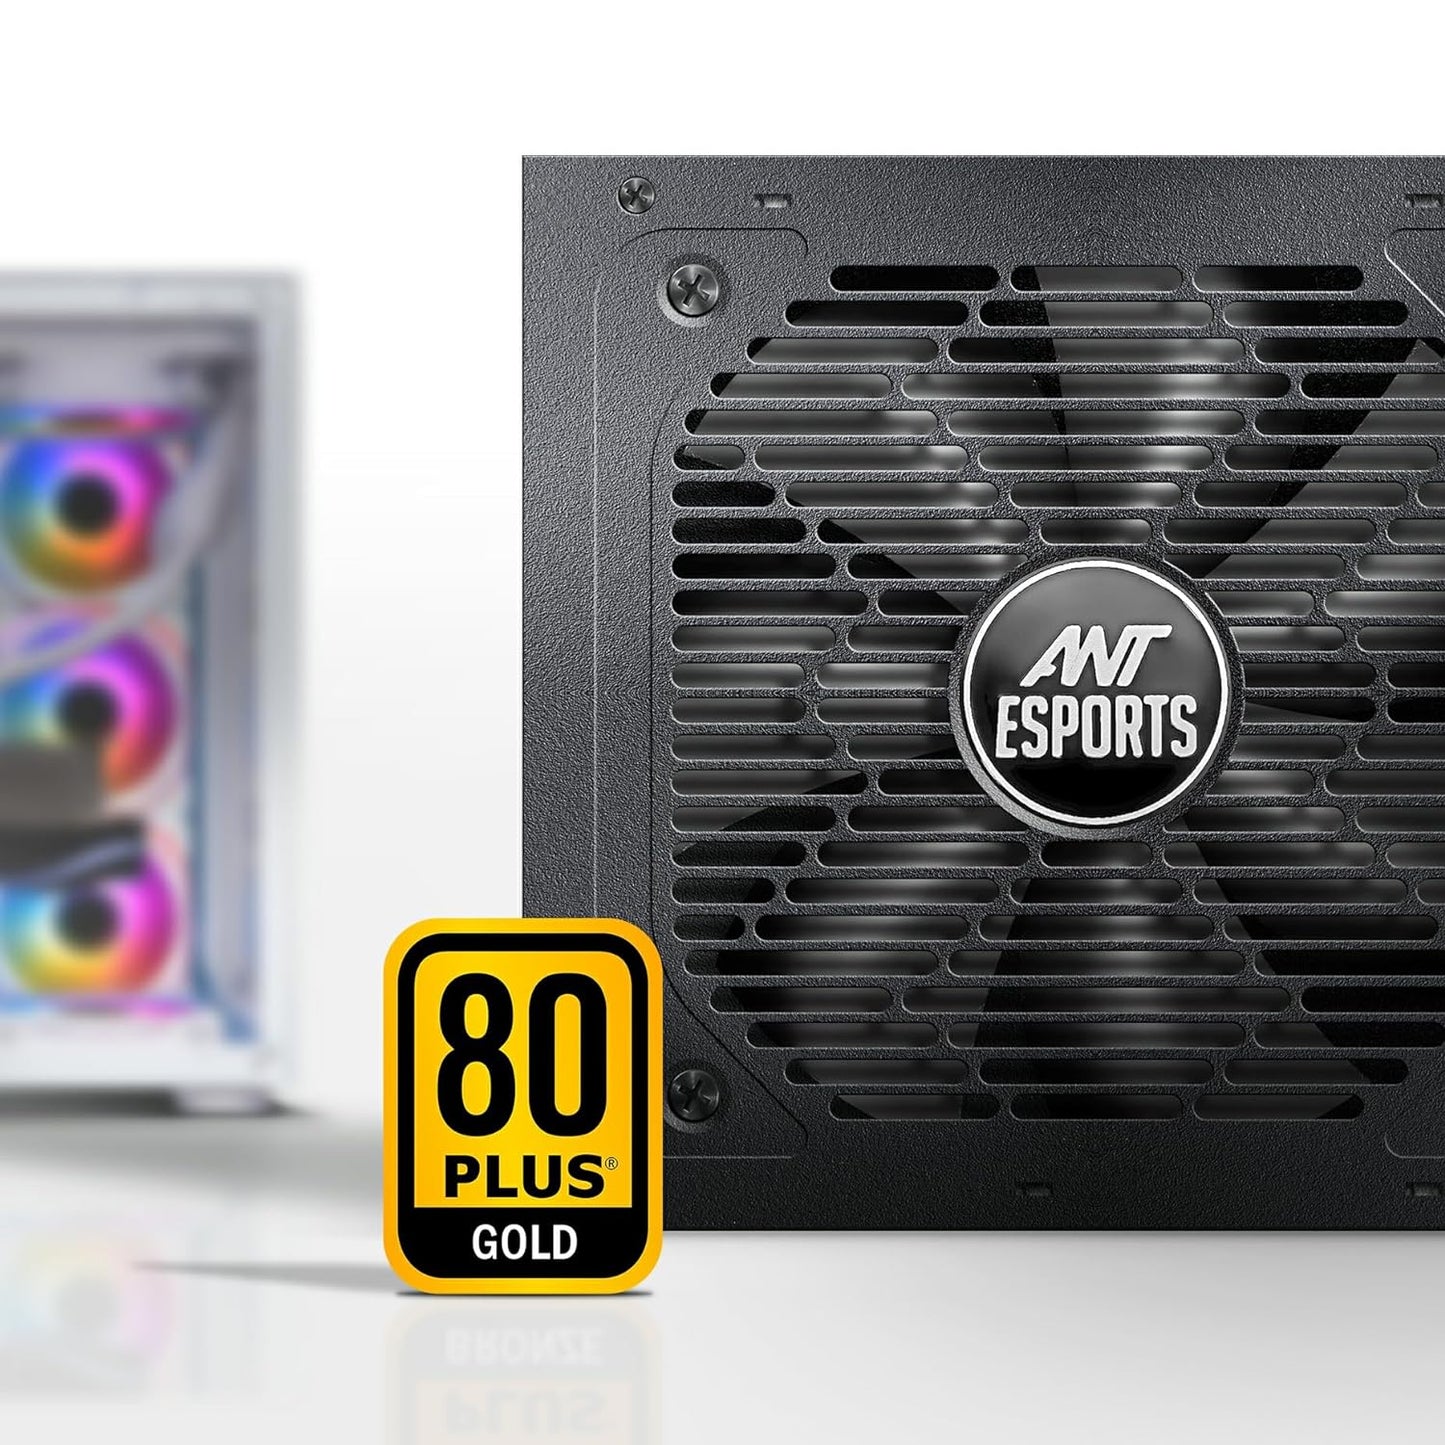 SMPS-ANT-ESPORTS-(650W)-FG650-GOLD